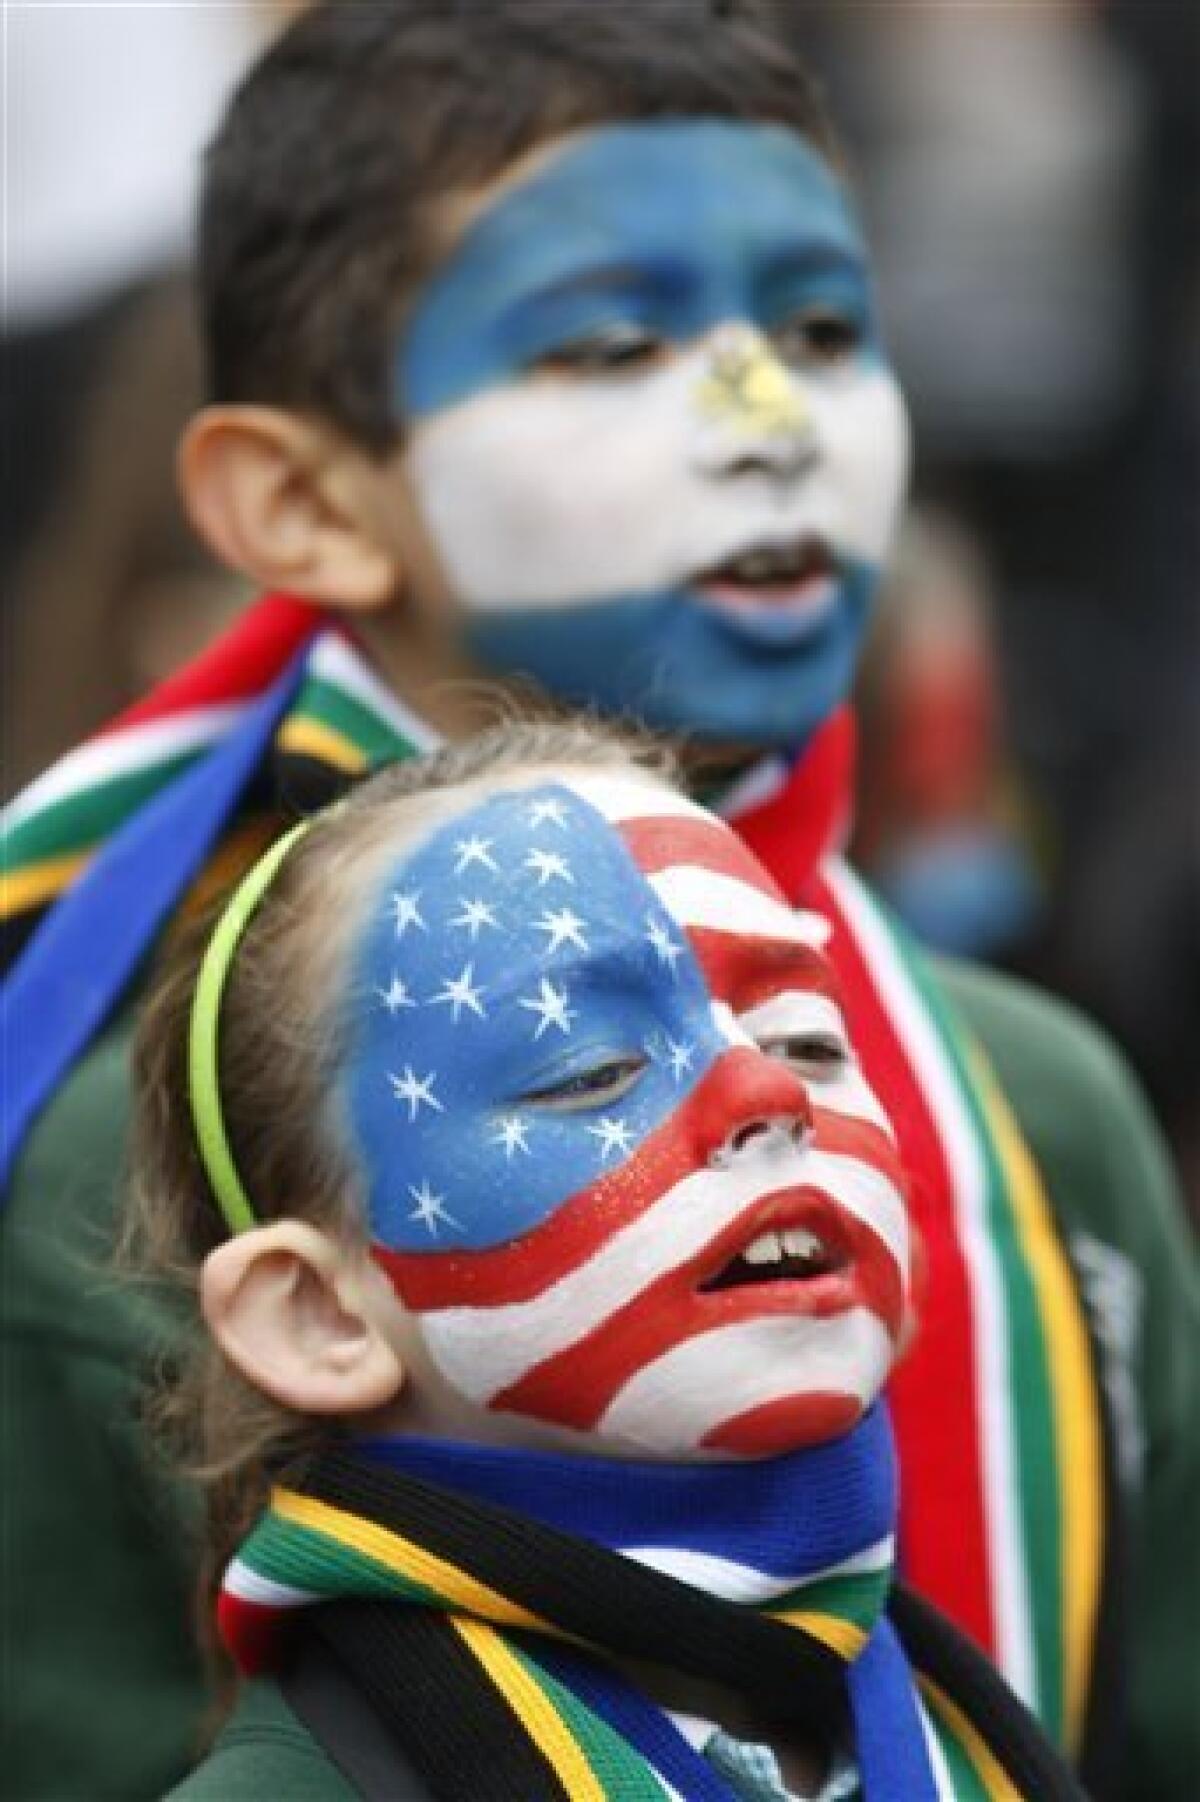 Pupils from St Joseph's Primary School with their faces painted in the U.S flag, bottom and a Argentinian flag wait for a special event to mark the start of South Africa World Cup Soccer at Trafalgar Square in London and to show support for England's bid to host the 2018 FIFA World Cup, Friday, June 11, 2010. (AP Photo/Sang Tan)